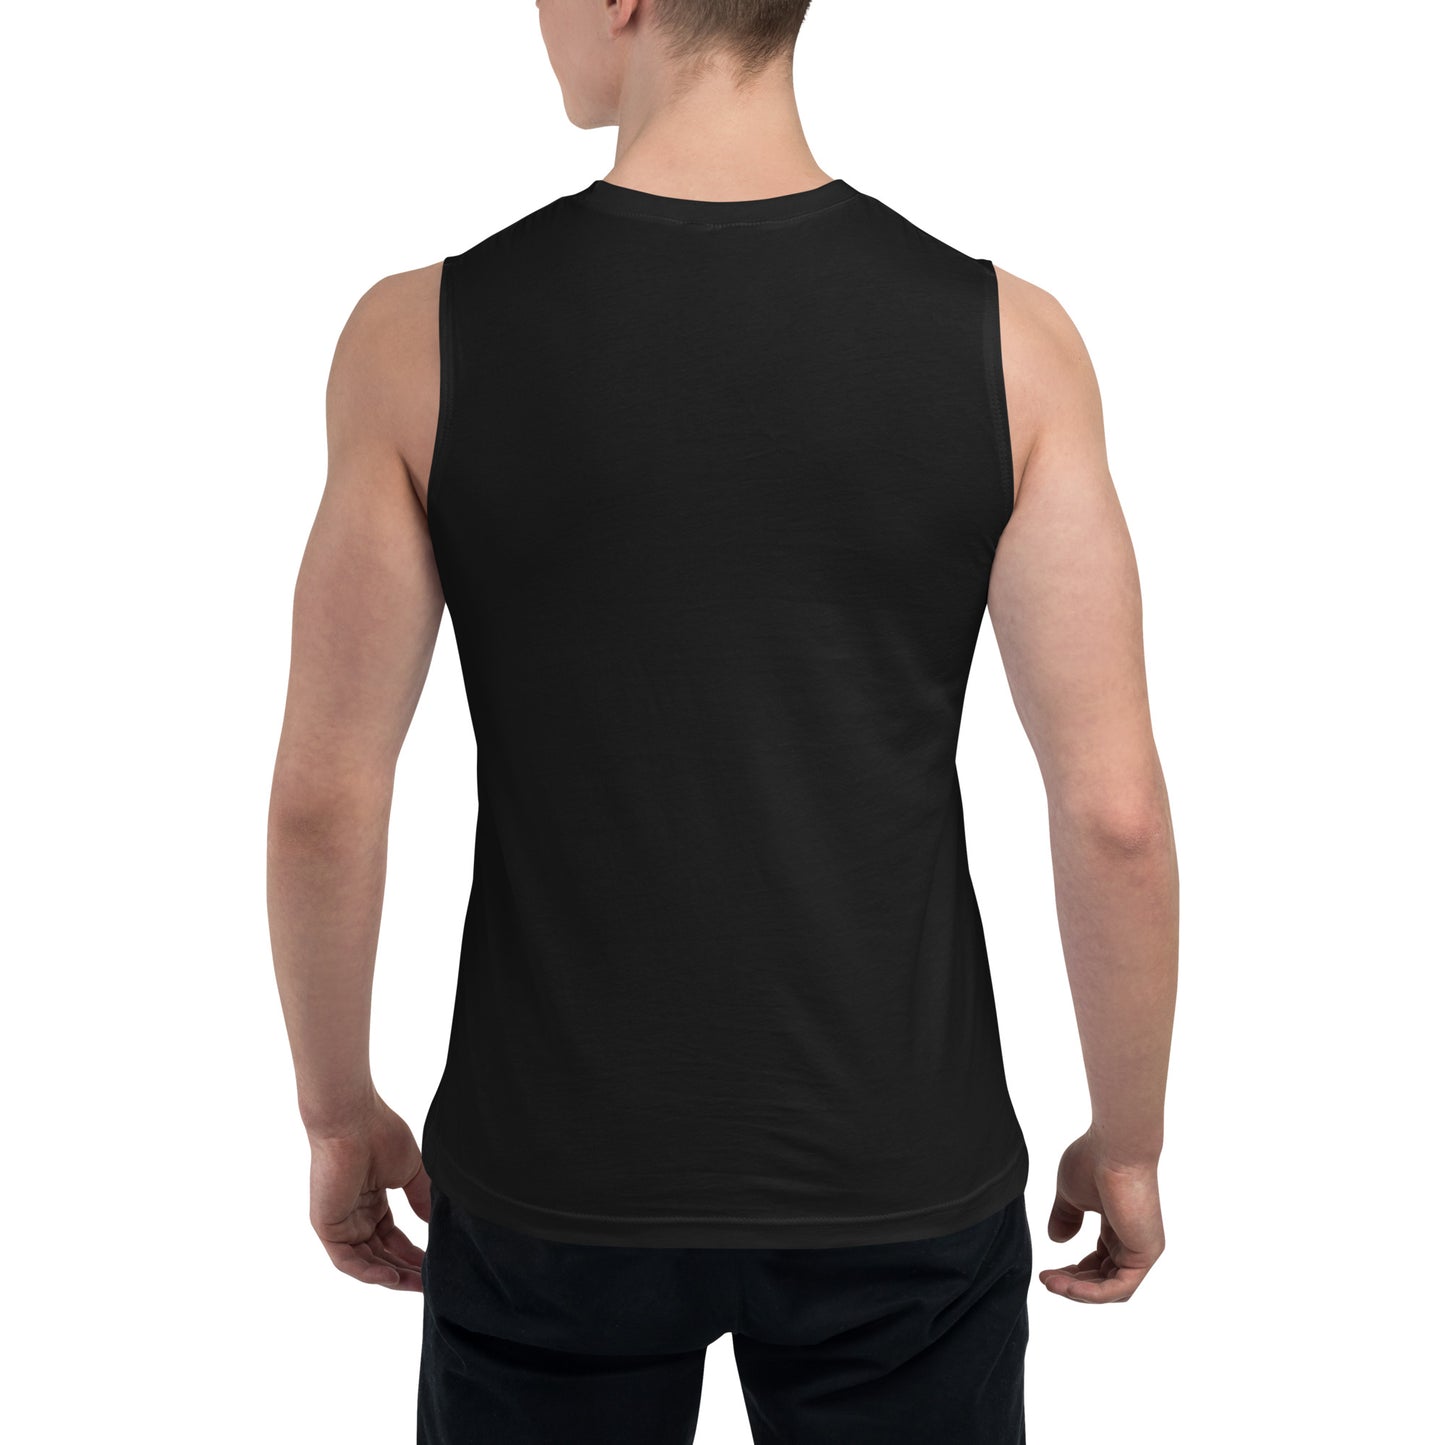 Small Black Sphere Muscle Shirt